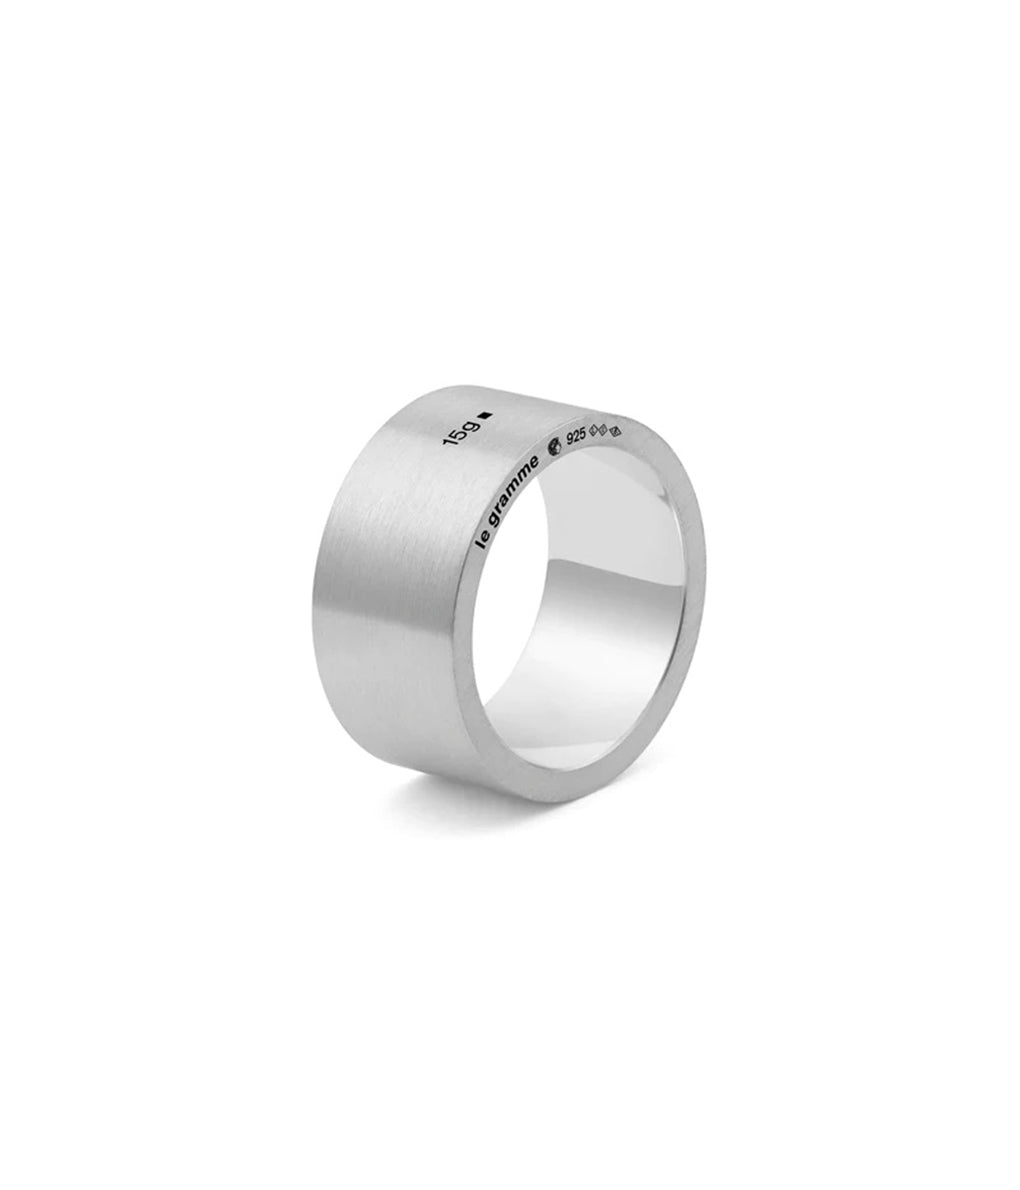 LE GRAMME "15G RIBBON RING BRUSHED" (NEW)